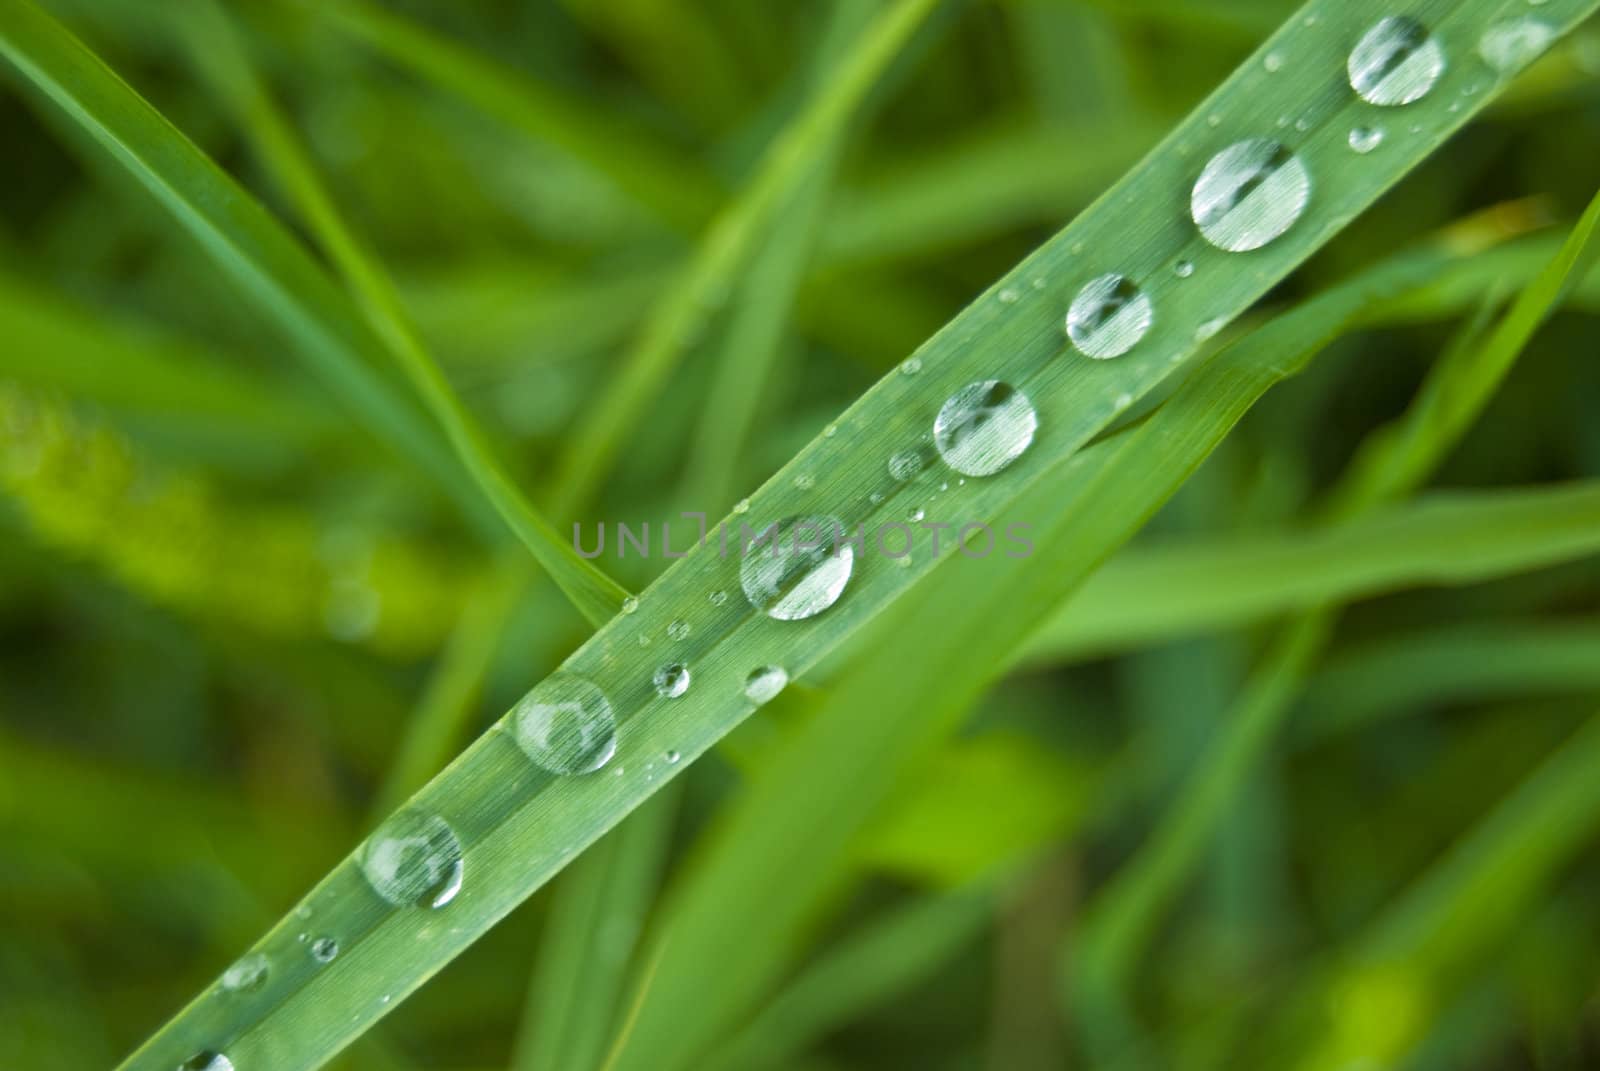 Raindrops lined up on a blade of grass